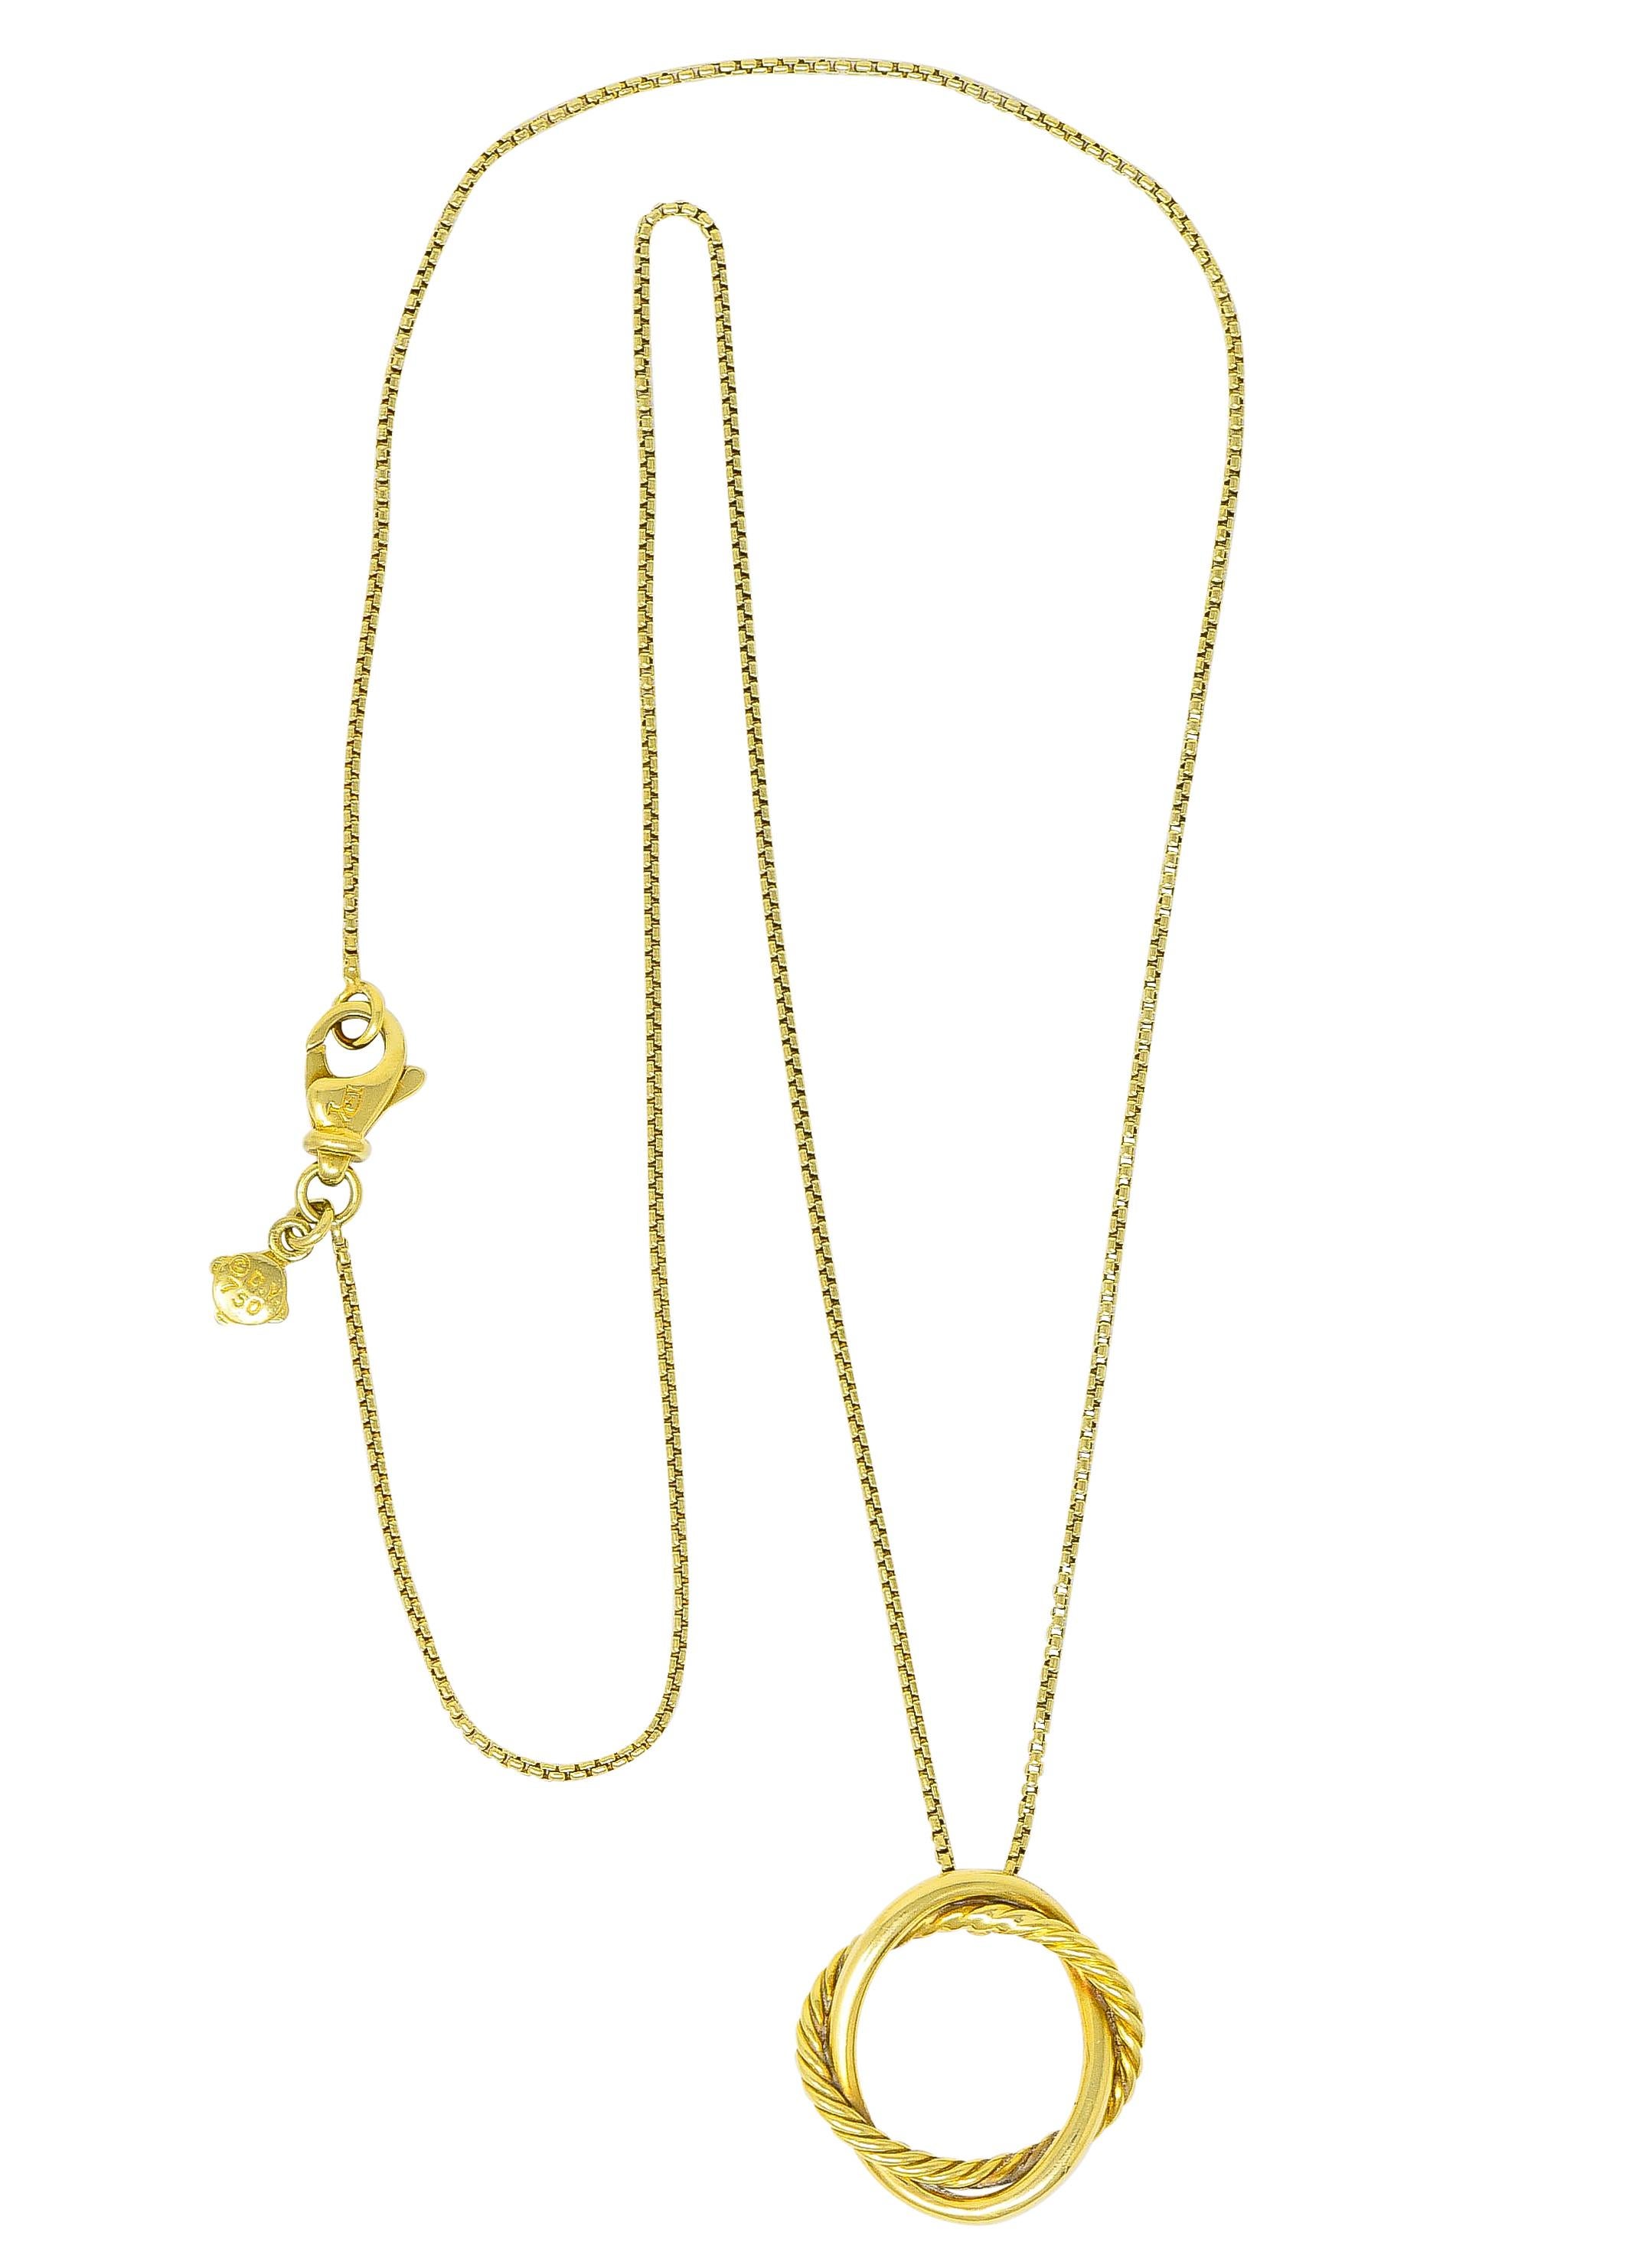 Pendant is designed as two intertwined circles

One is polished gold while the other is the iconic twisted cable motif

Suspending from gold box chain that completes as a stylized lobster clasp

With logo link and maker's mark for David Yurman

Both